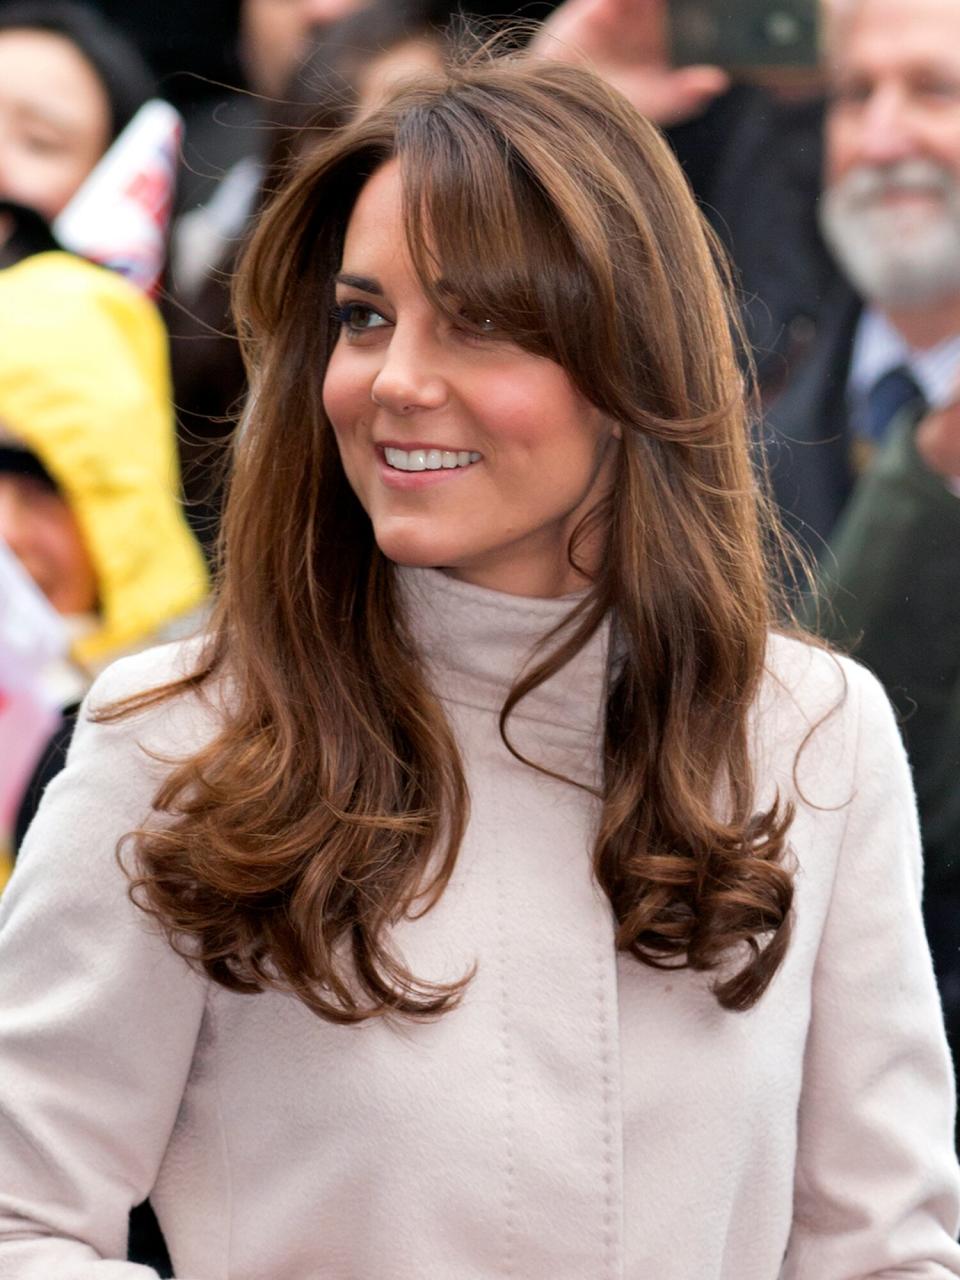 Catherine, Duchess of Cambridge arrives at The Guildhall during her and husband Prince William, Duke of Cambridge's first official visit to Cambridge on November 28, 2012 in Cambridge, England